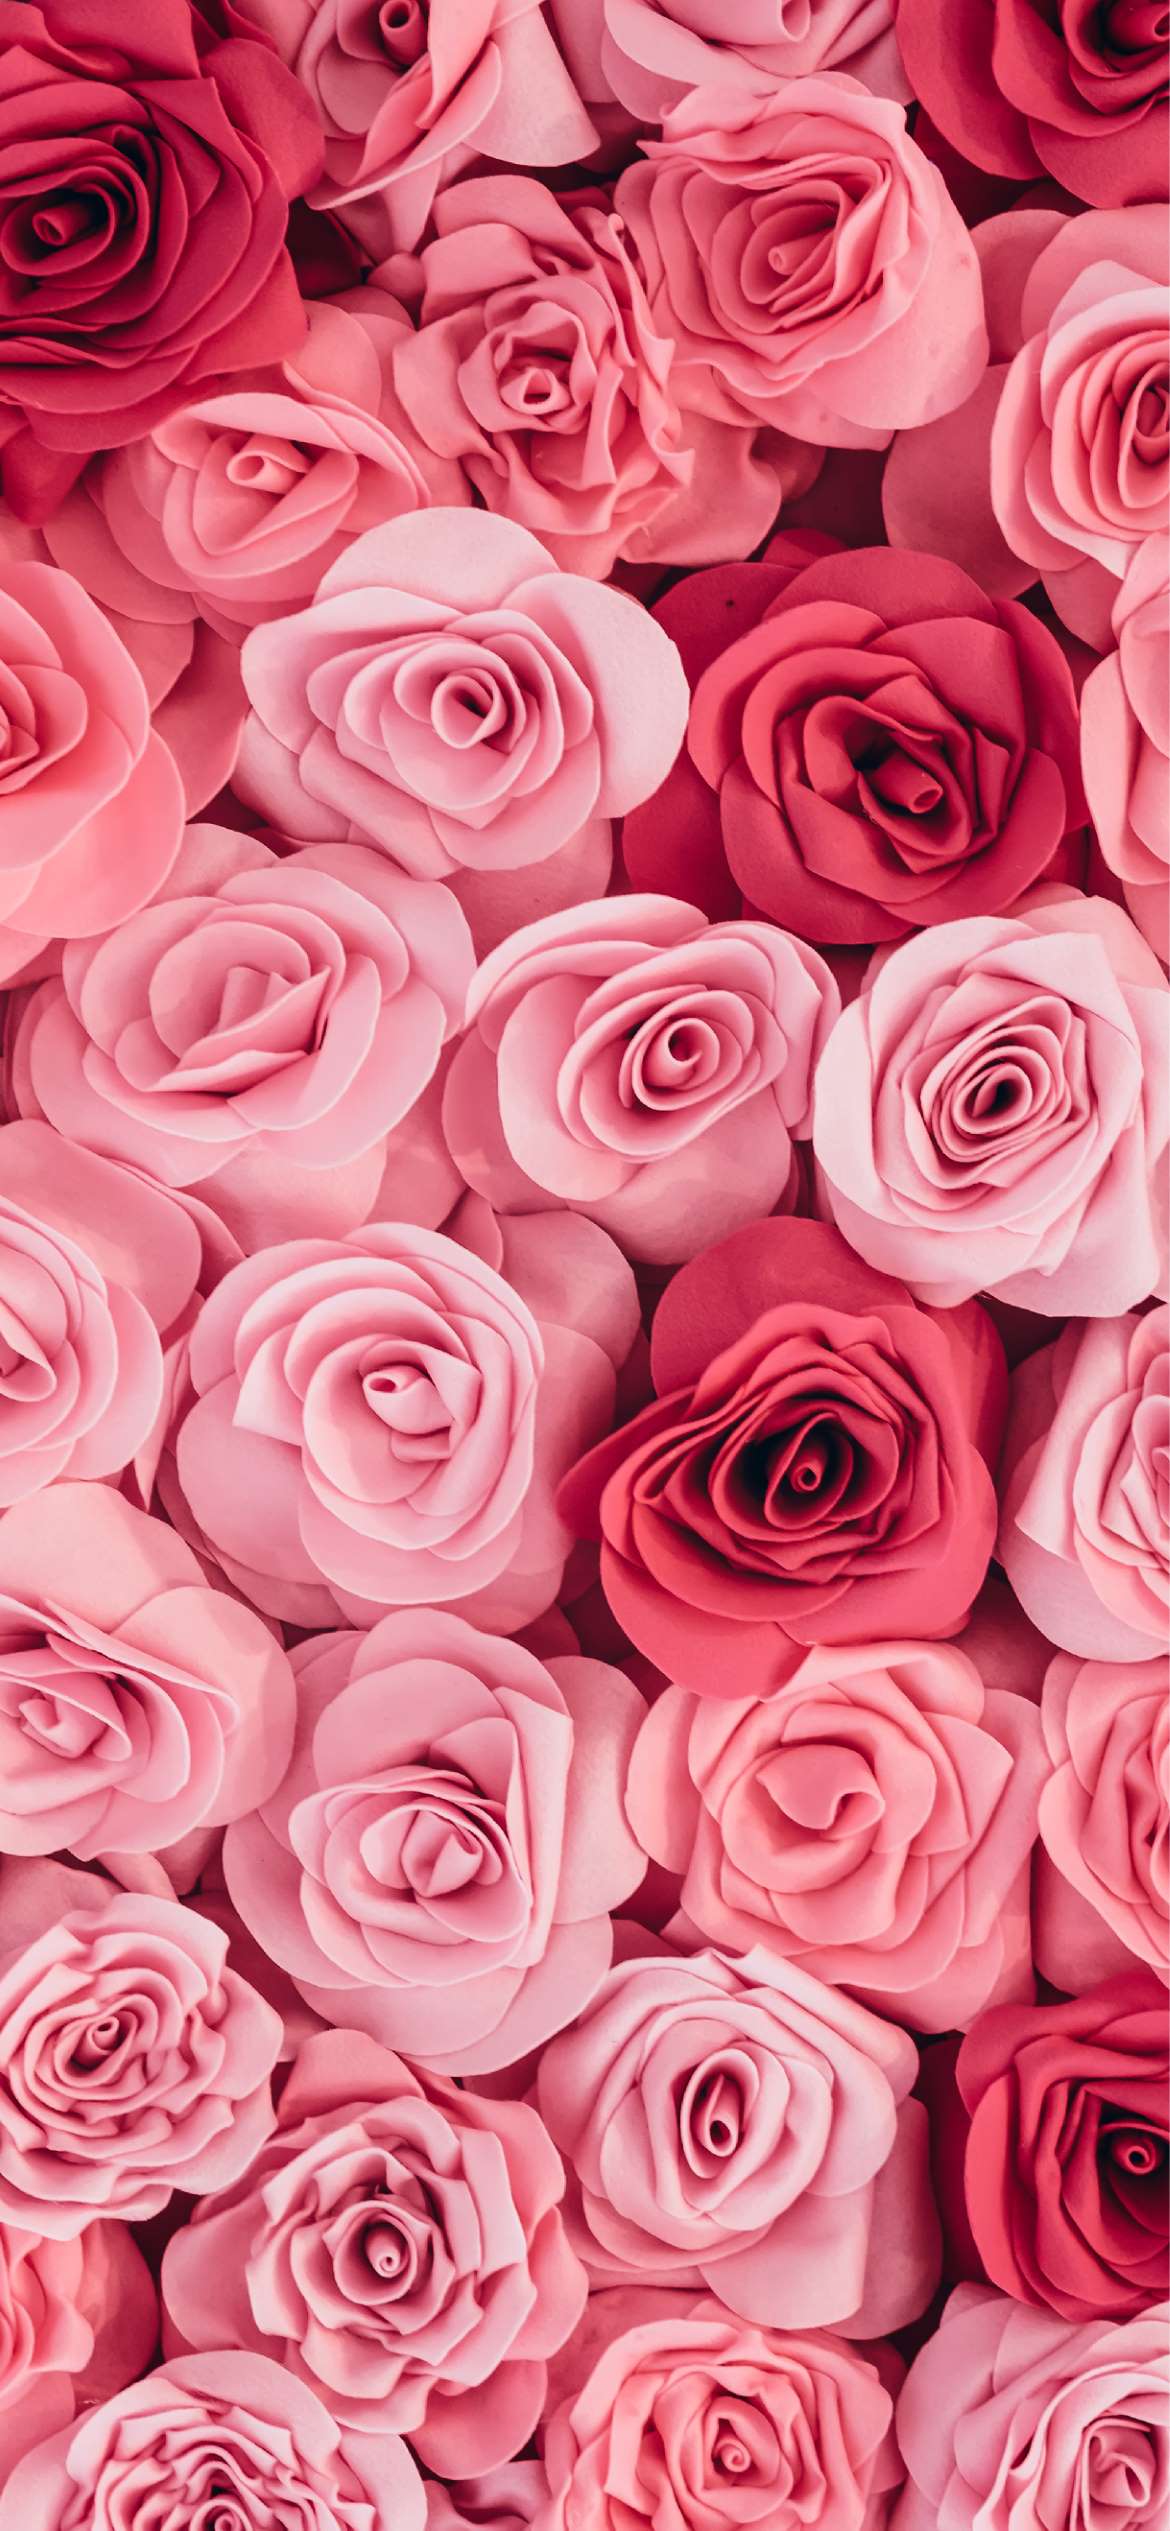 Valentines Day Wallpaper | 50 Cute And Lovely Phone Wallpapers